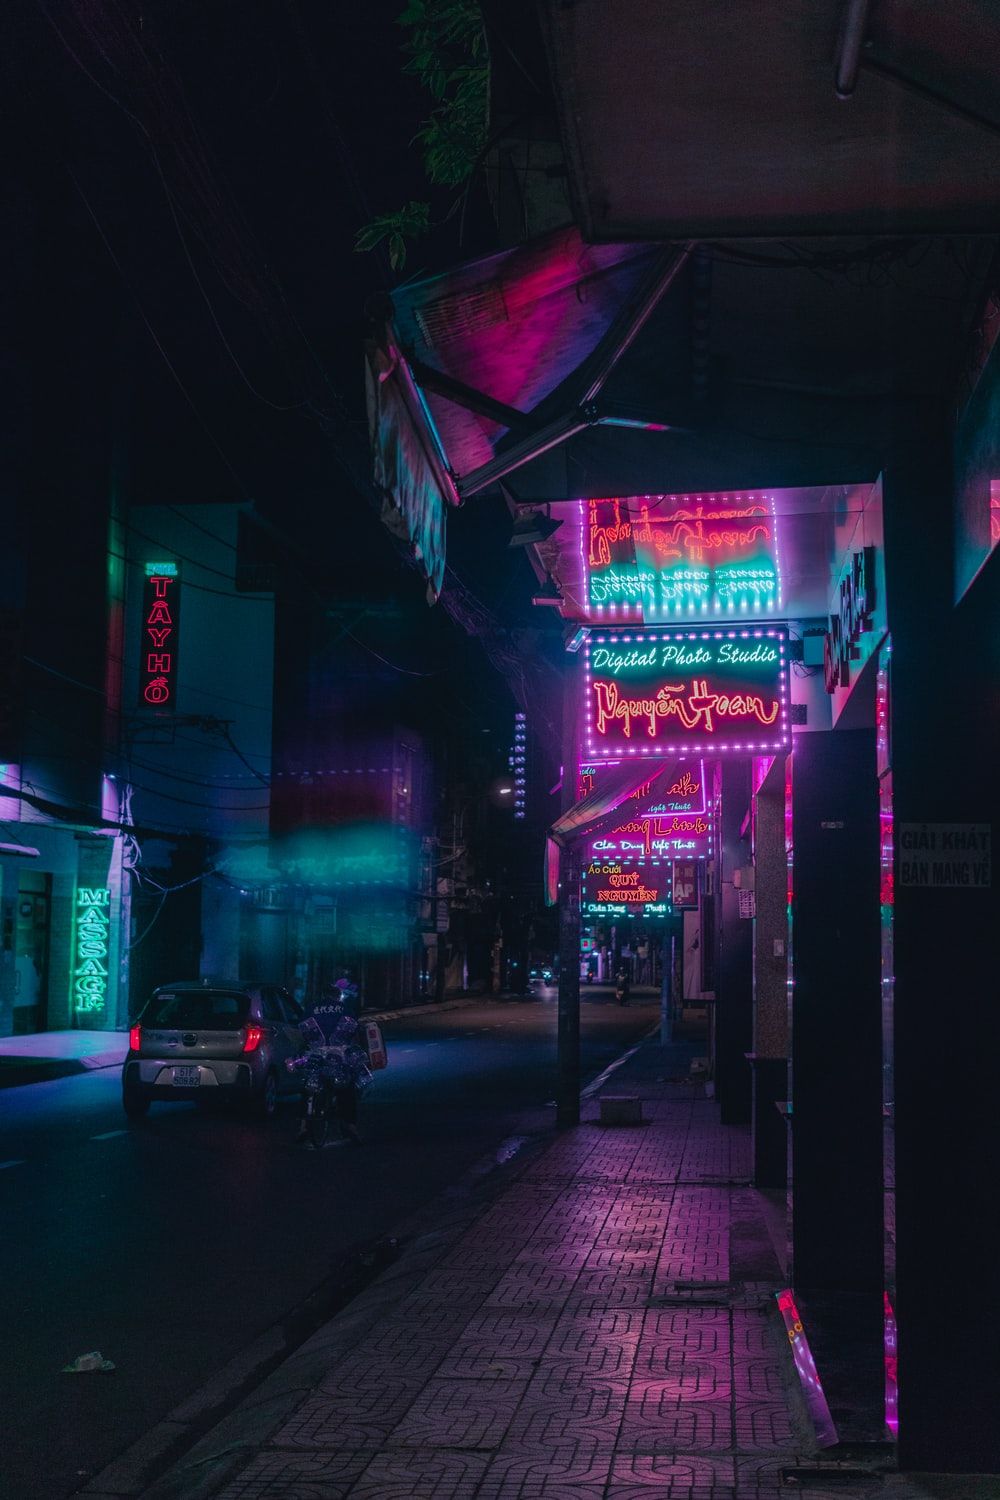 Neon Street Picture. Download Free Image